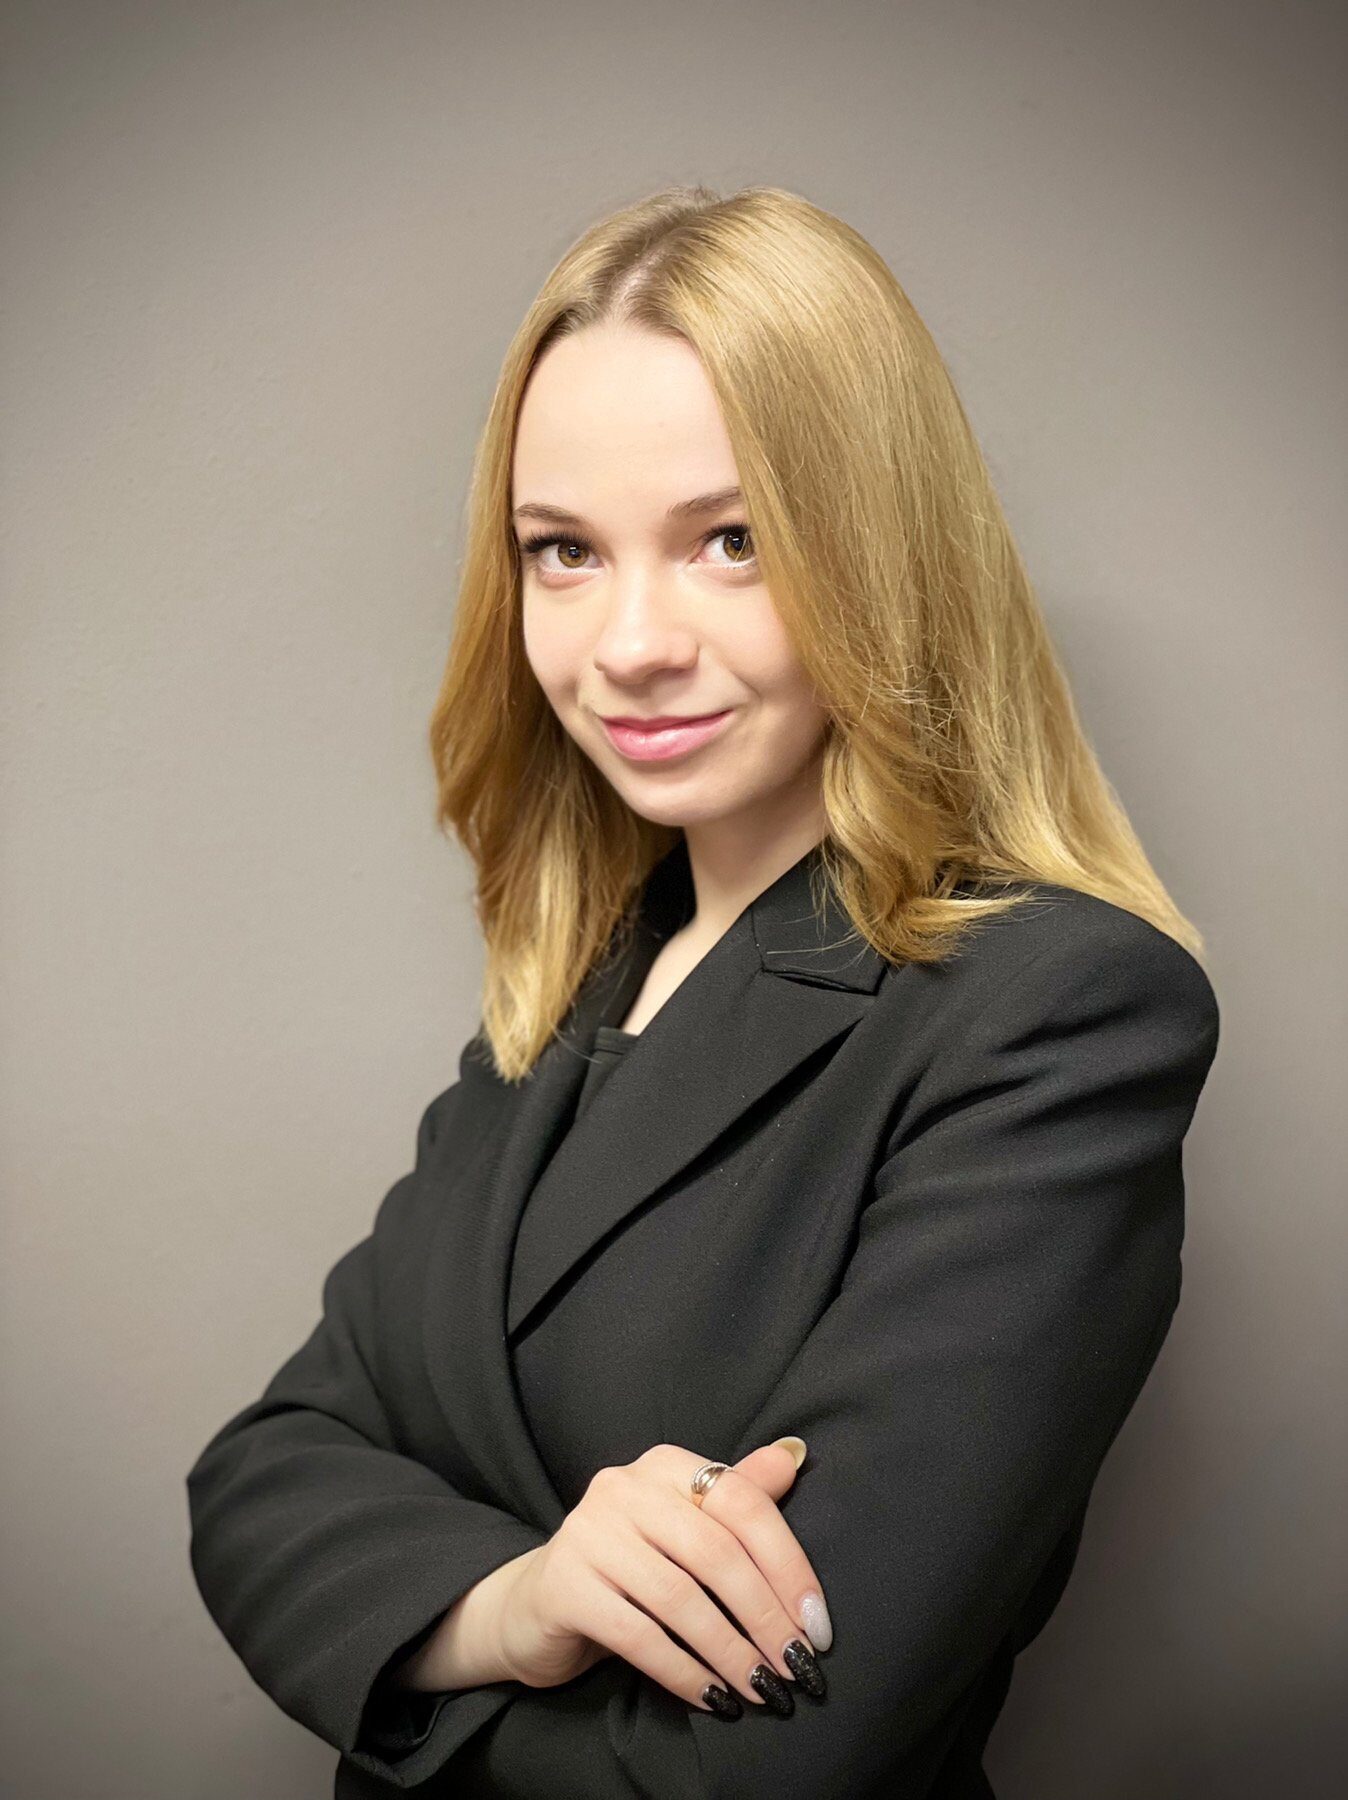 Ananich Ekaterina - Lawyer in Debt Collection Practice